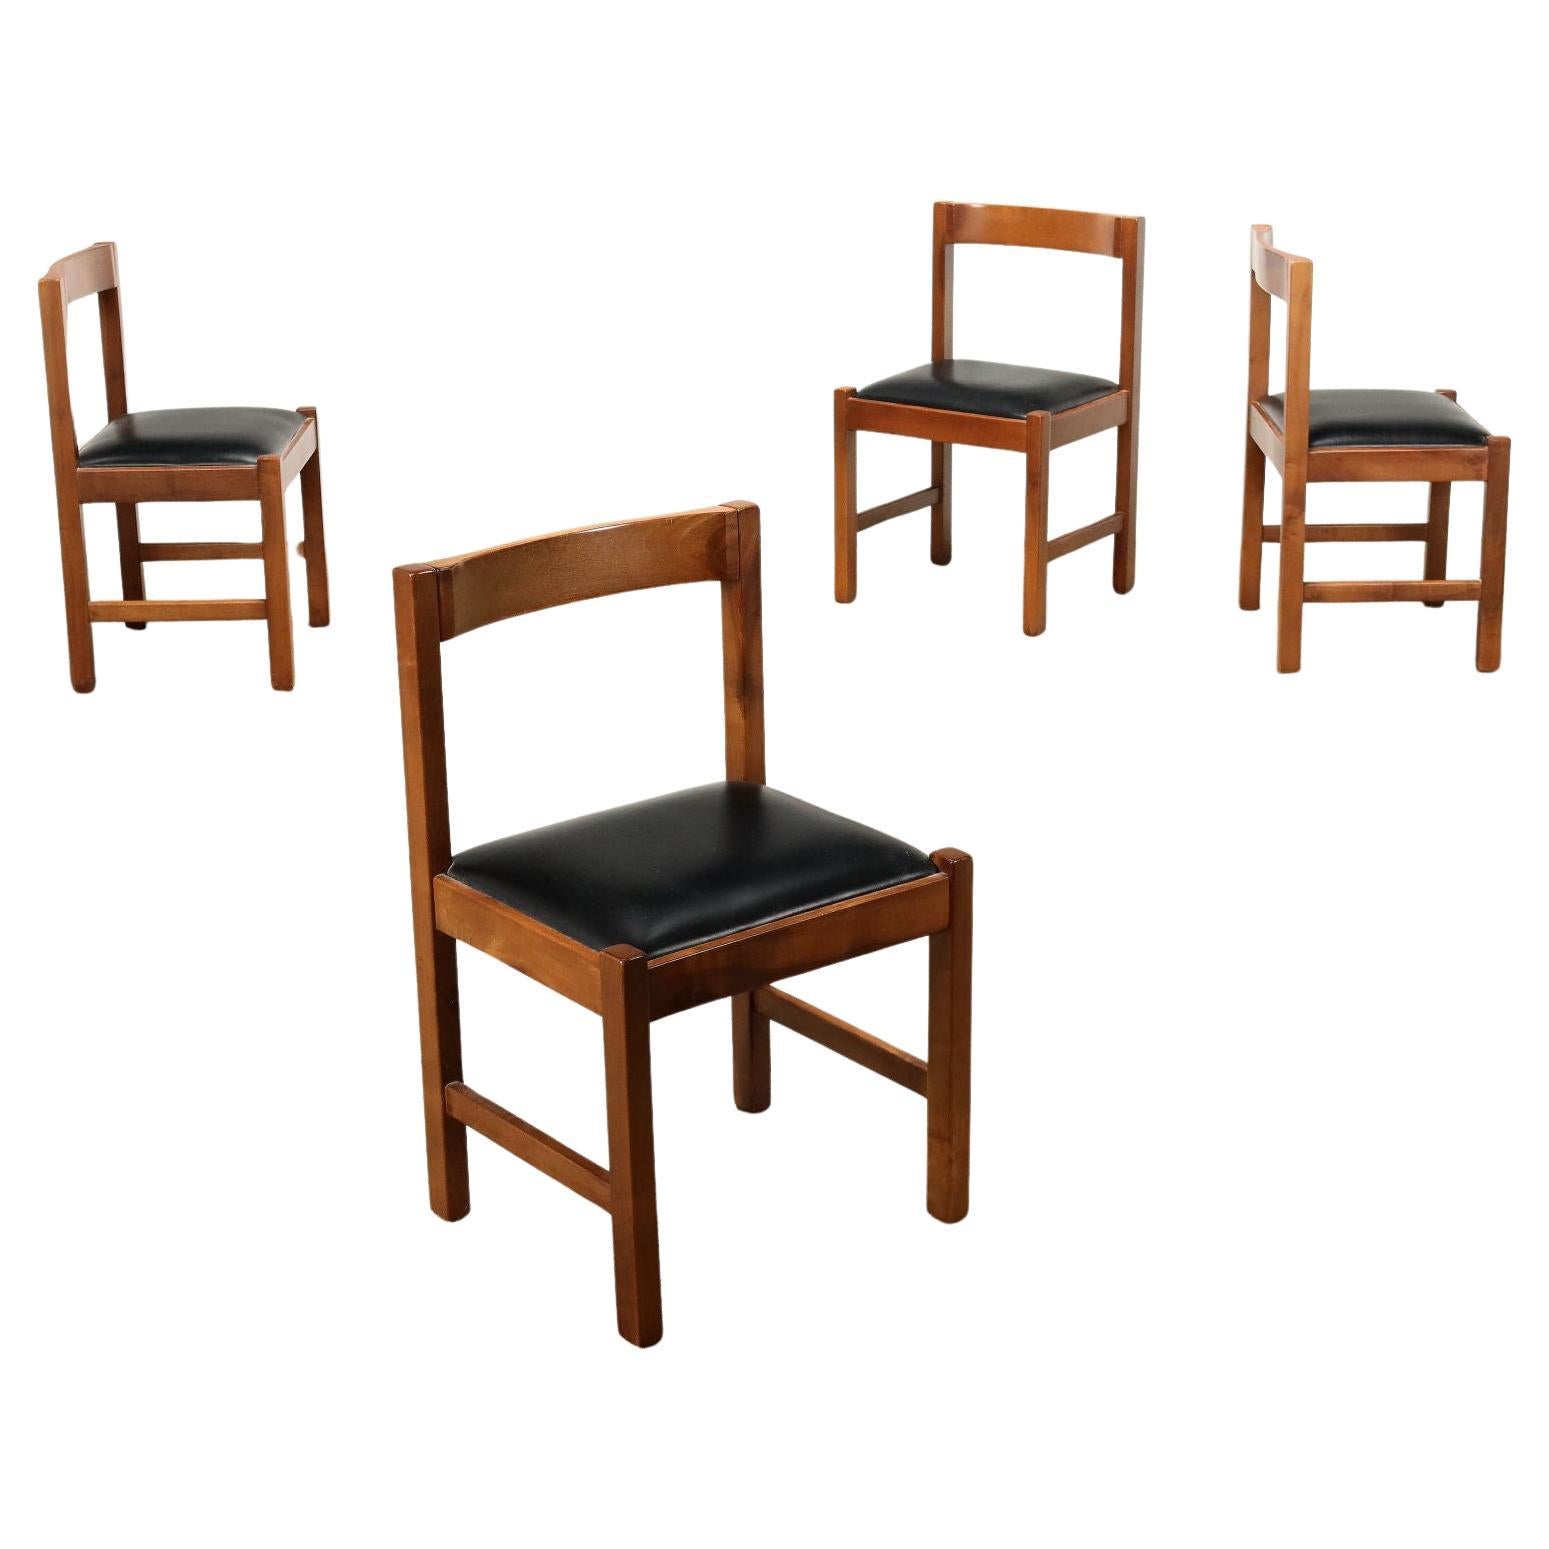 Group Four Chairs 70s-80s Years For Sale